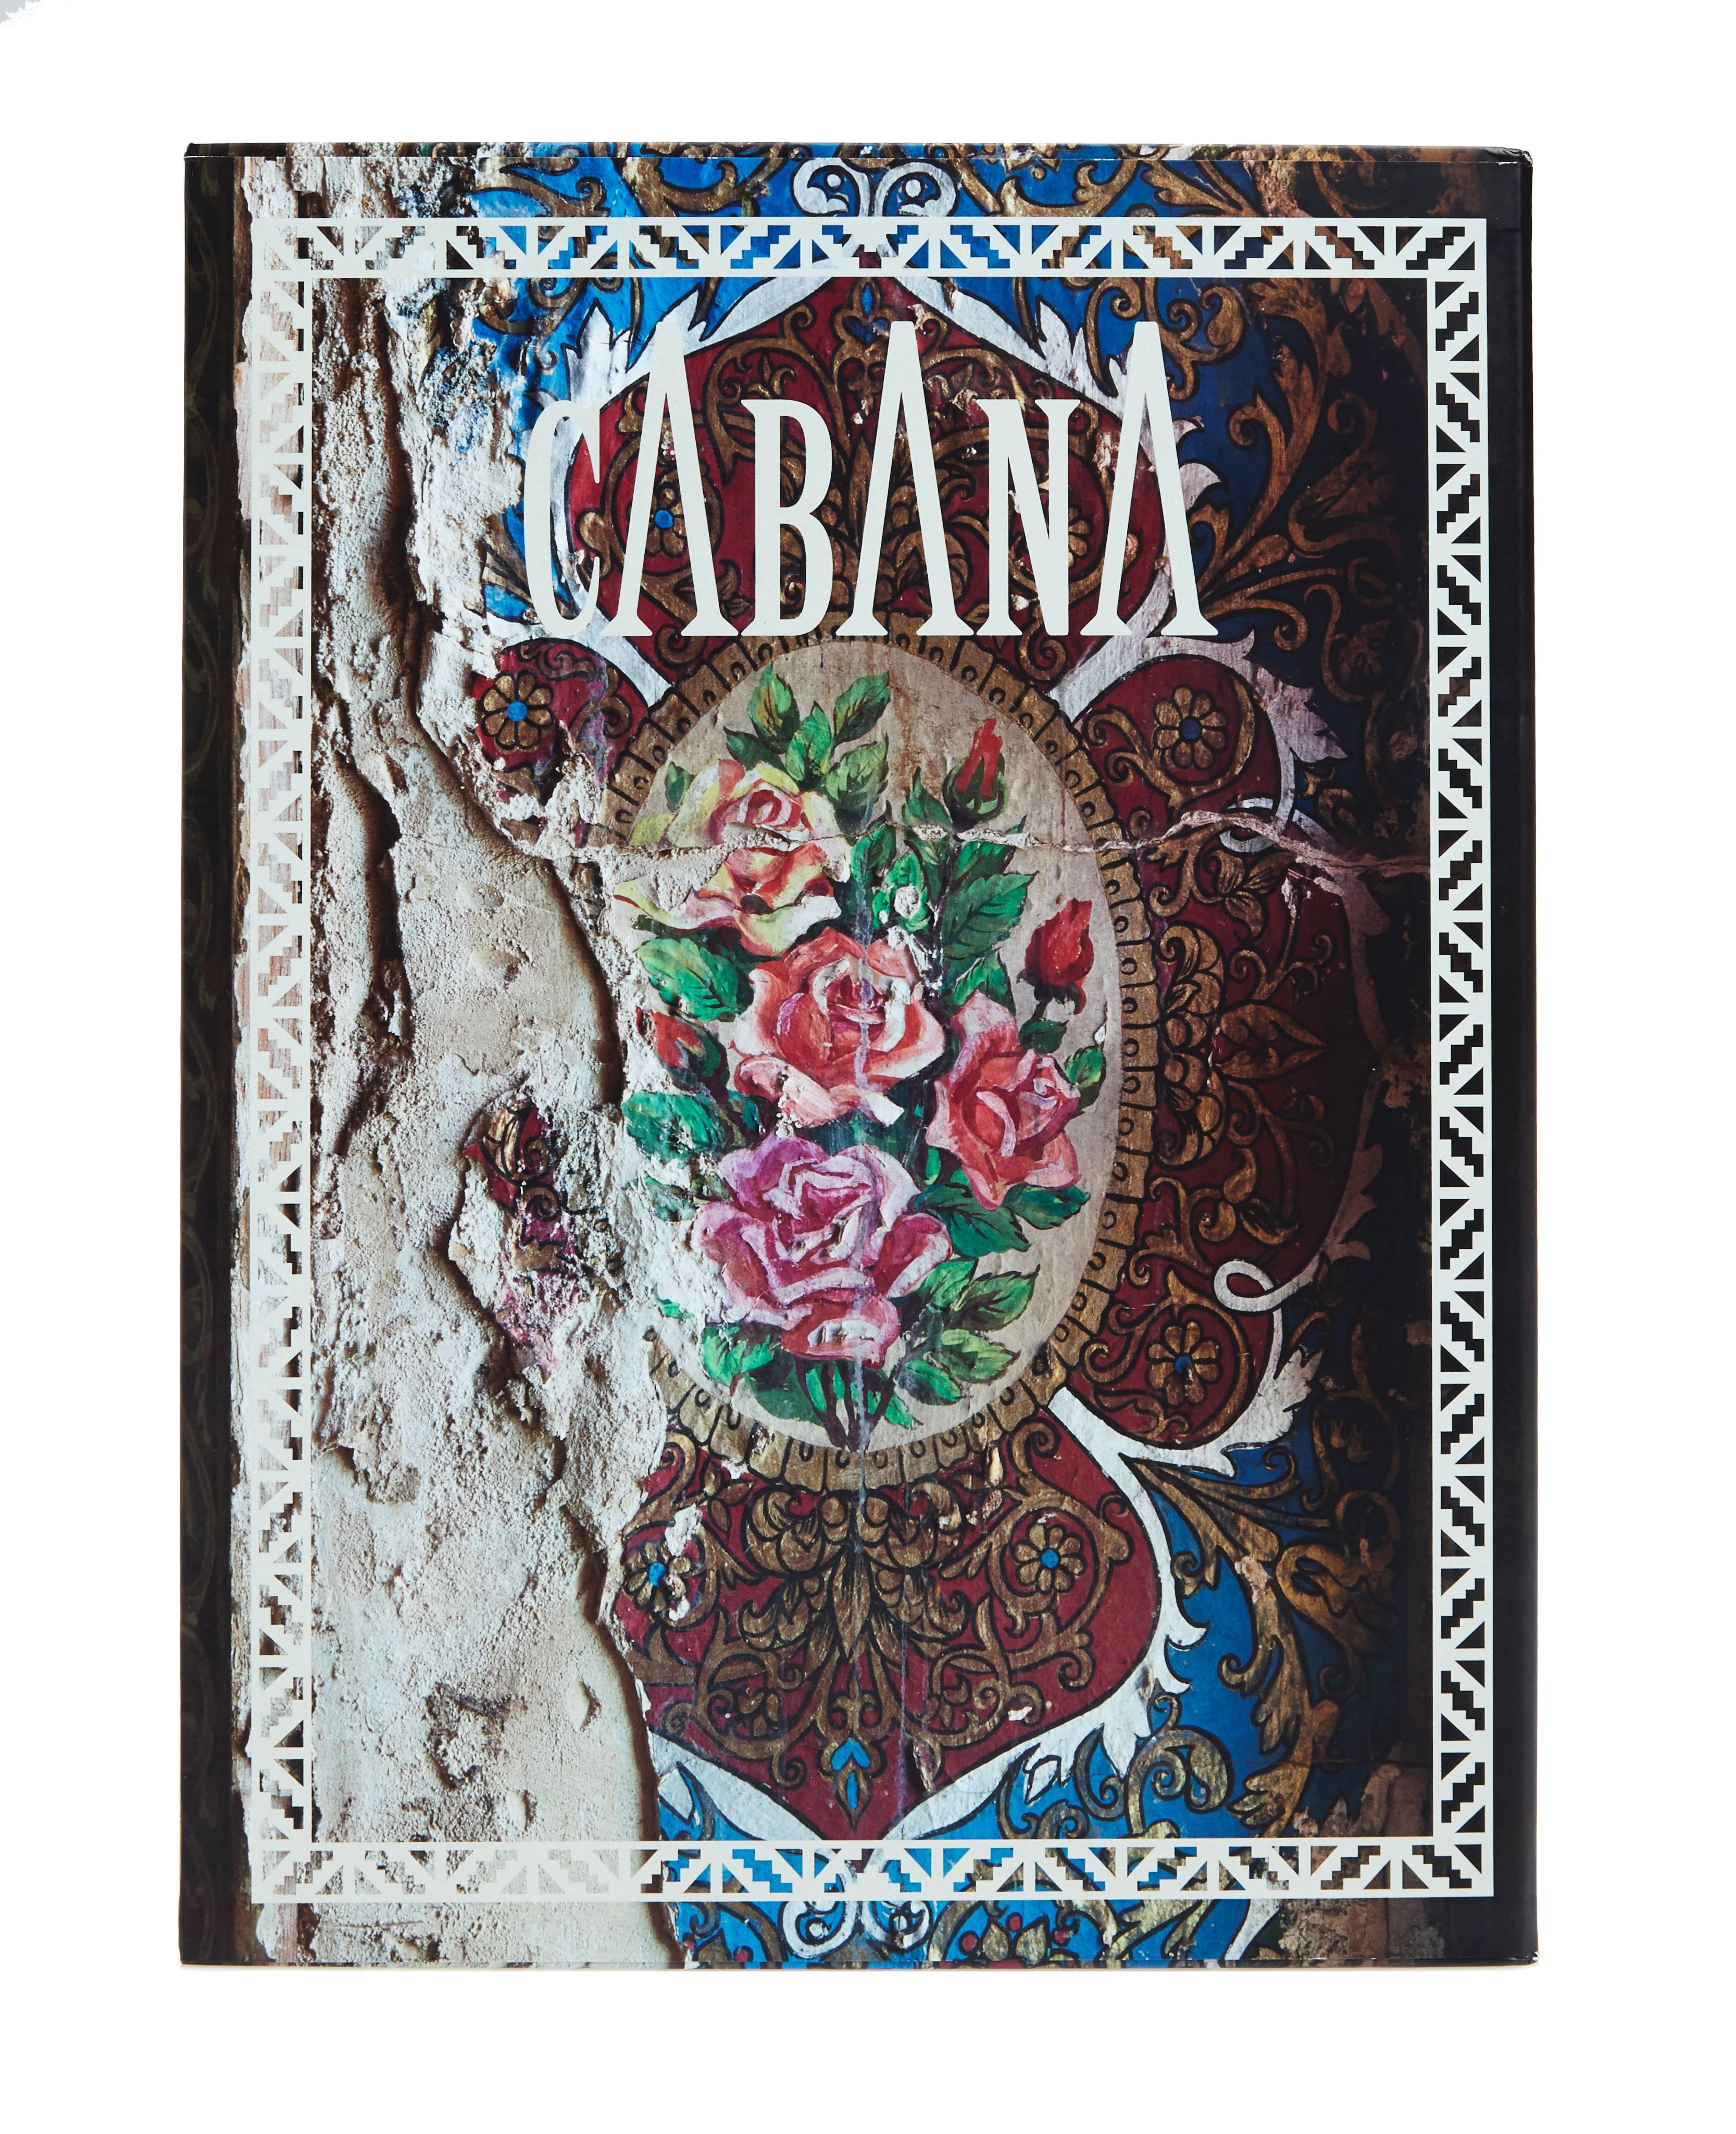 This is a limited edition (1 of 2) box made specially for the pop up store that includes the first six issues of Cabana.

Cabana magazine is a biannual International Interiors magazine, based in London and printed in Italy. Each issue is a sort of